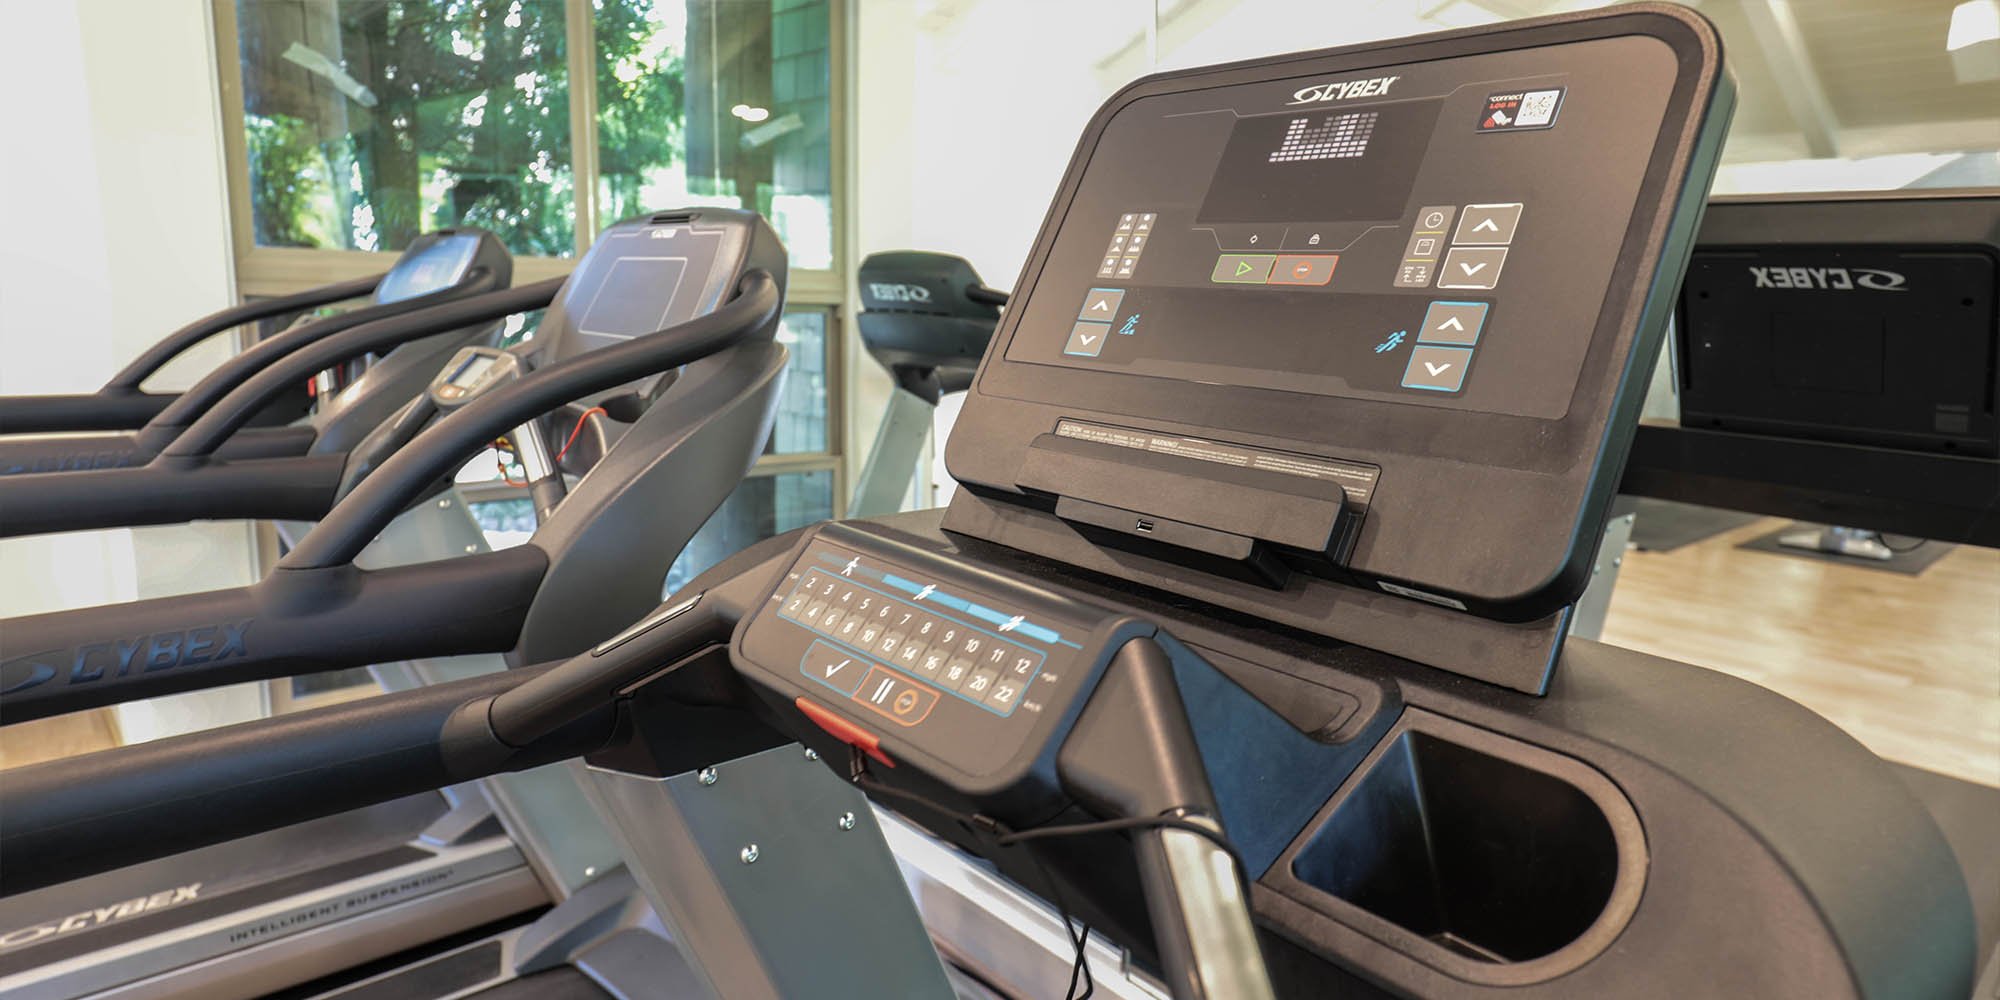 Home | Commercial Fitness Equipment Fairfield Ca | FIT-TECH SERVICE, INC.